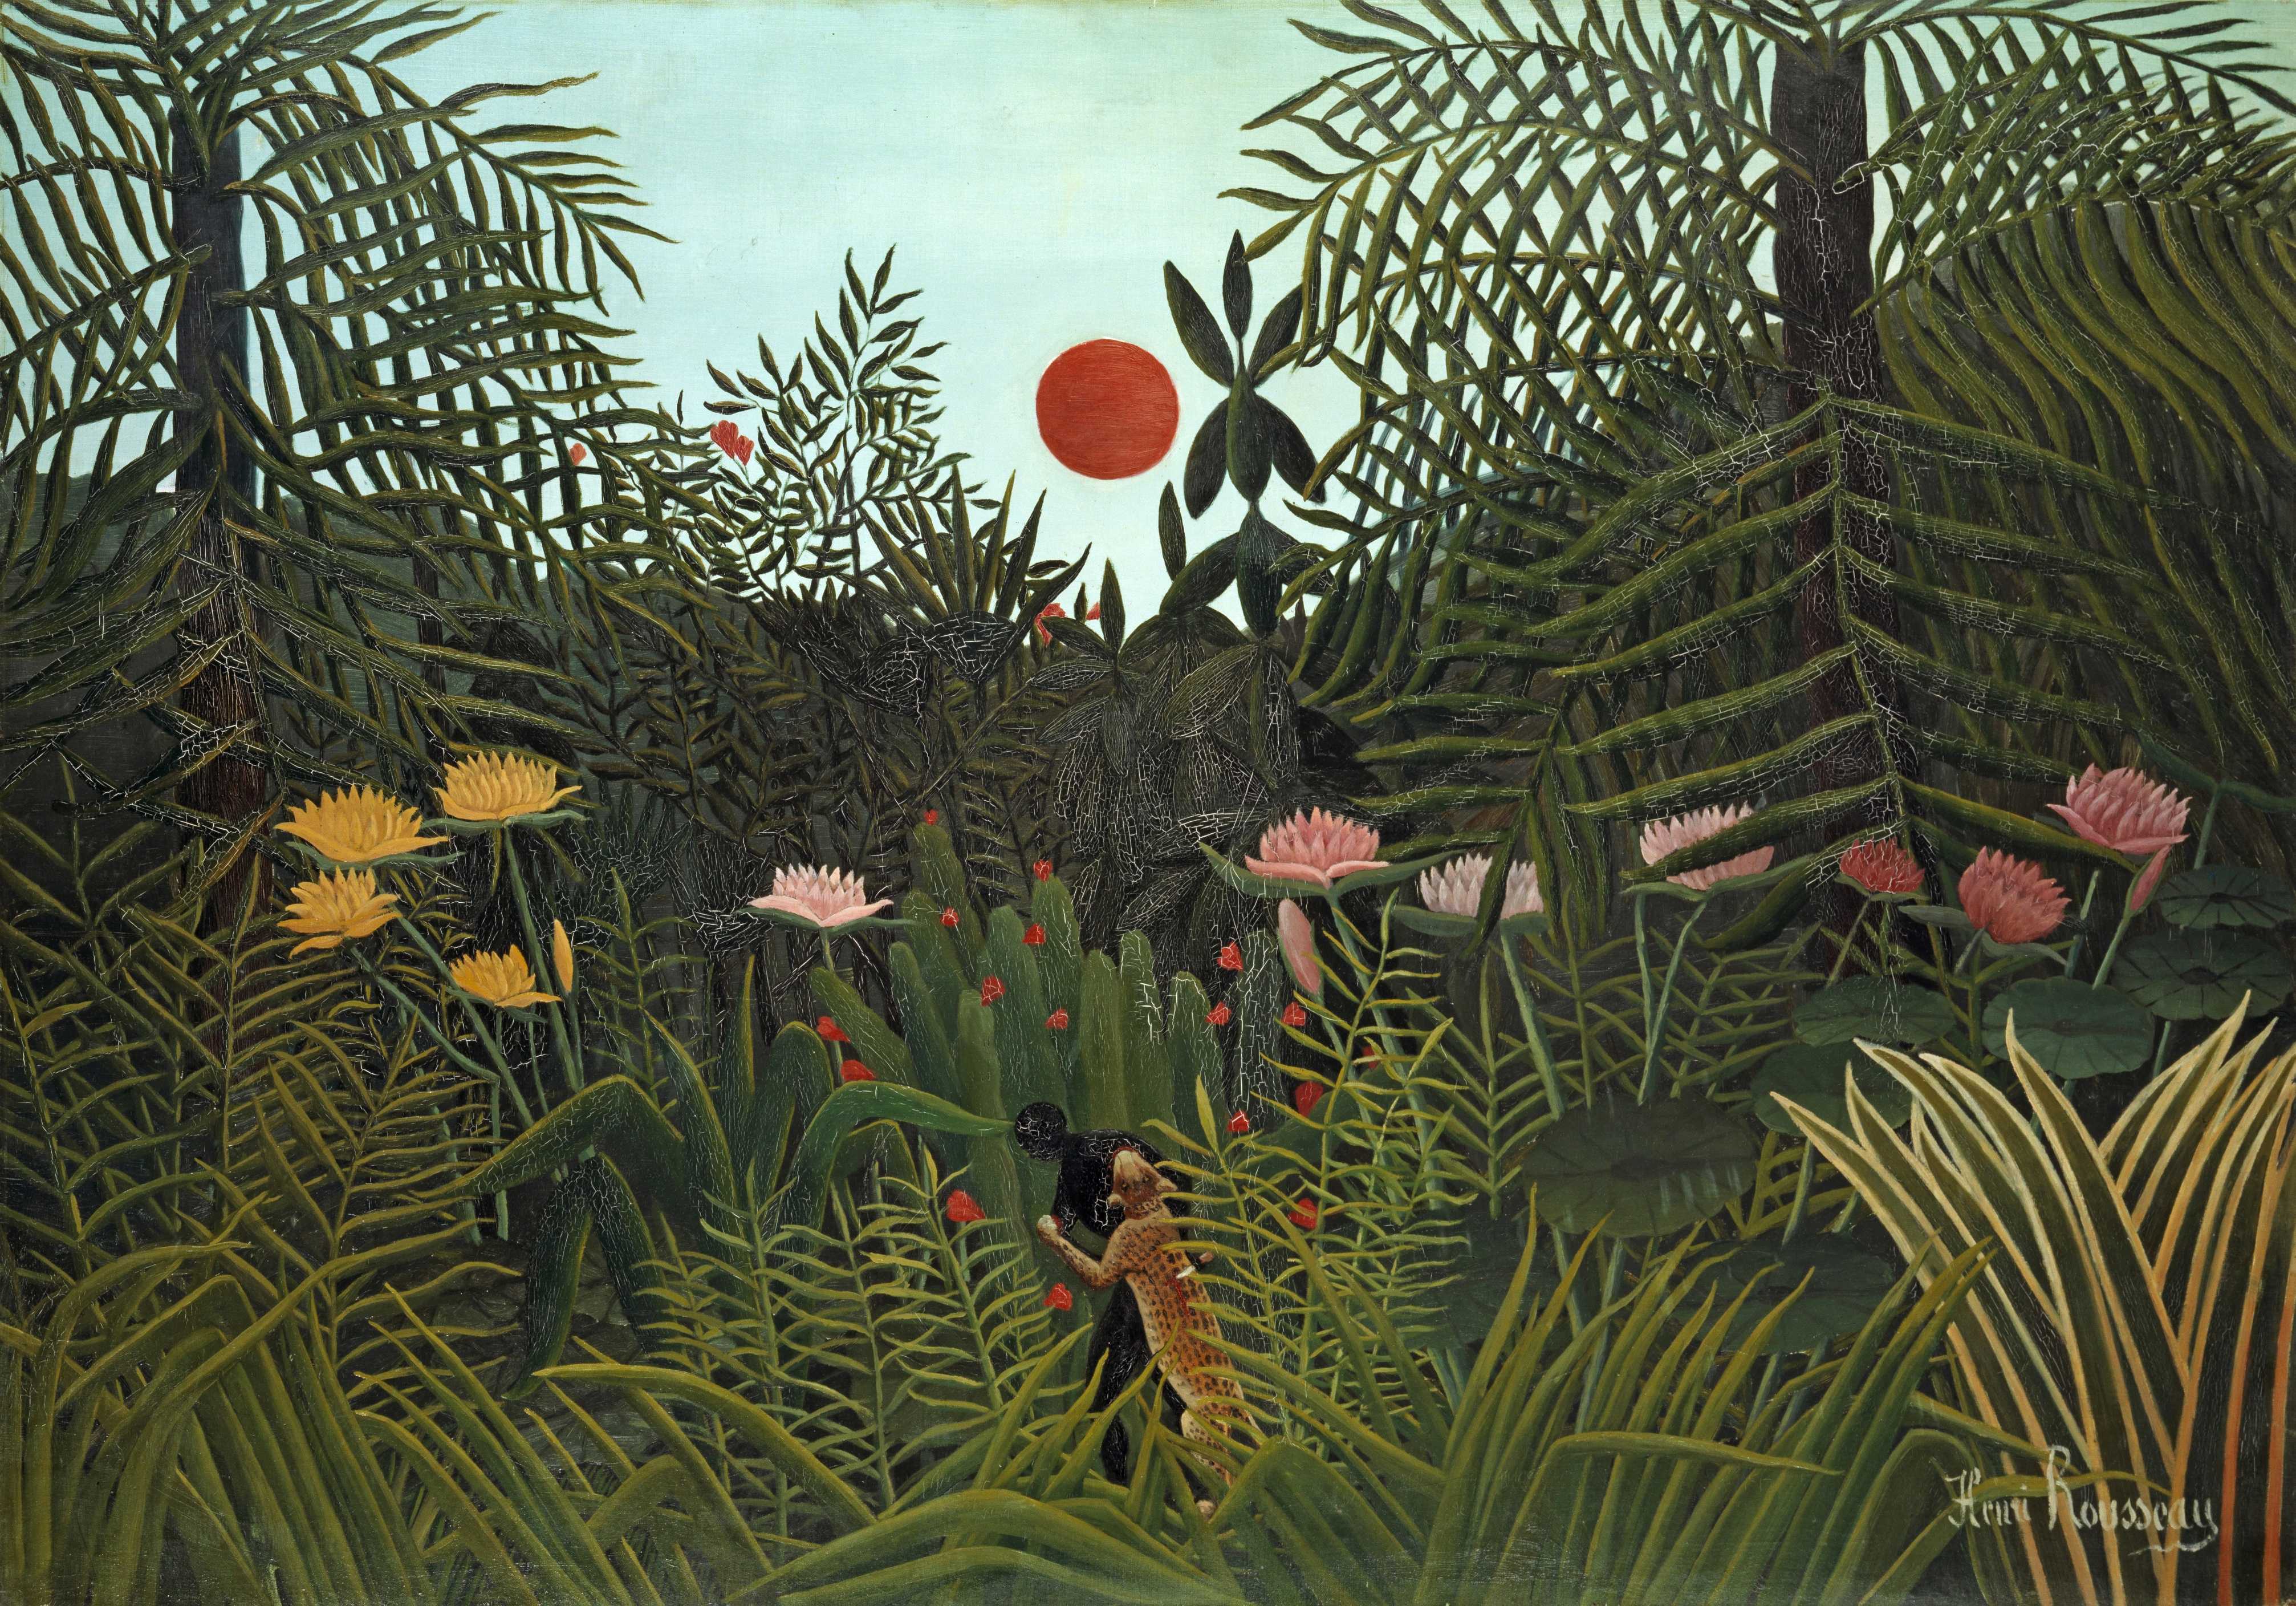 Find out more about Henri Rousseau - Jungle with Setting Sun